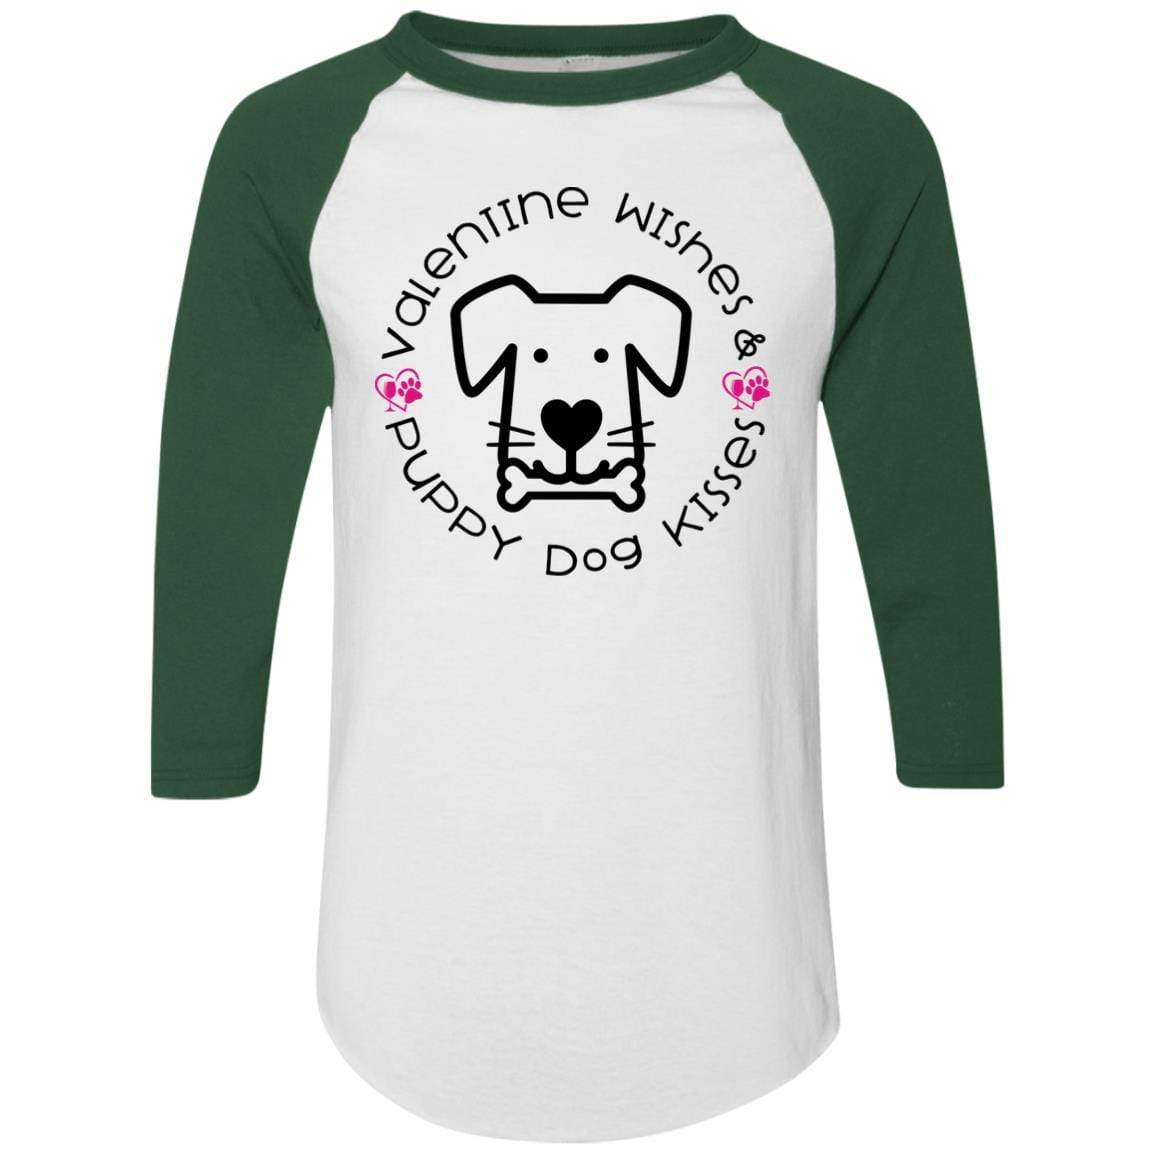 T-Shirts White/Dark Green / S Winey Bitches Co 'Valentine Wishes and Puppy Dog Kisses" (Dog) Colorblock Raglan Jersey WineyBitchesCo